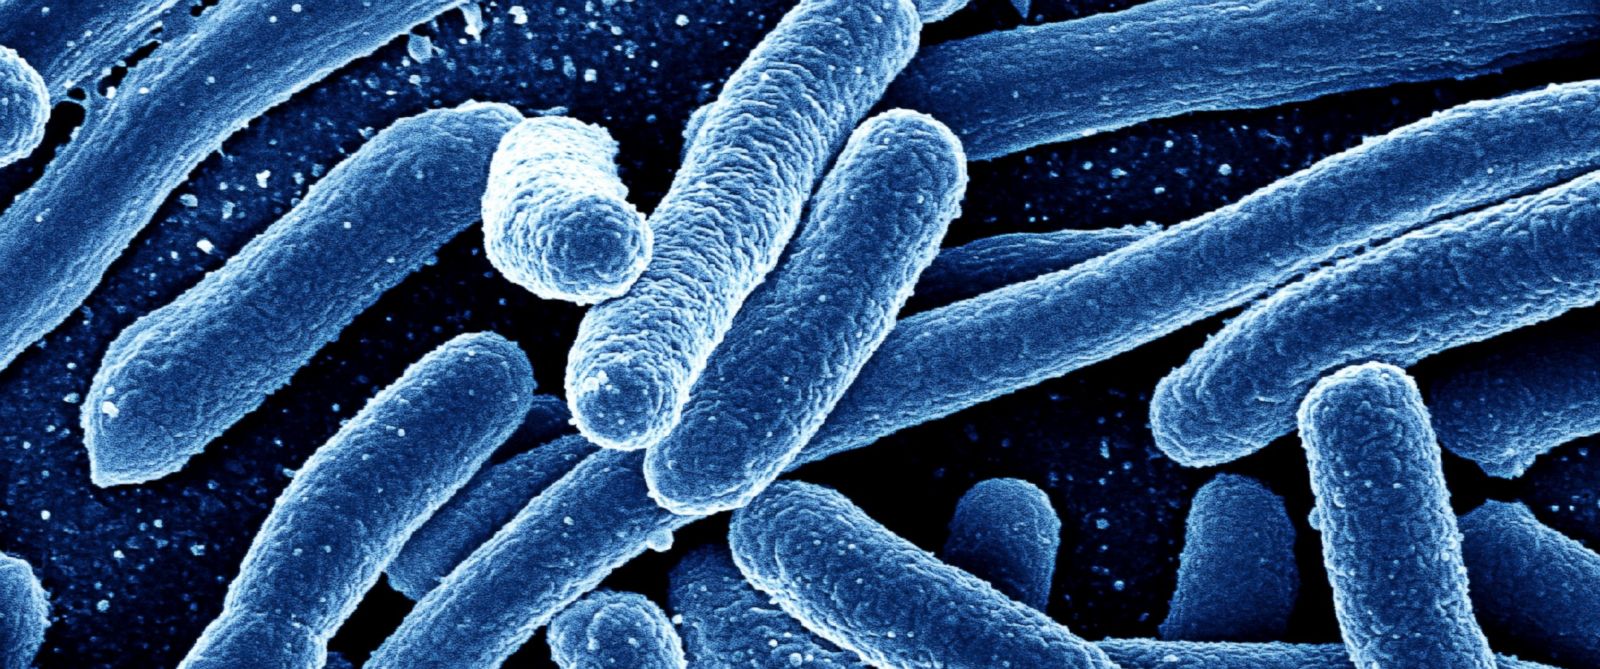 NASA scientists discover FIVE new previously unknown strains of antibiotic-resistant bacteria in SPACE